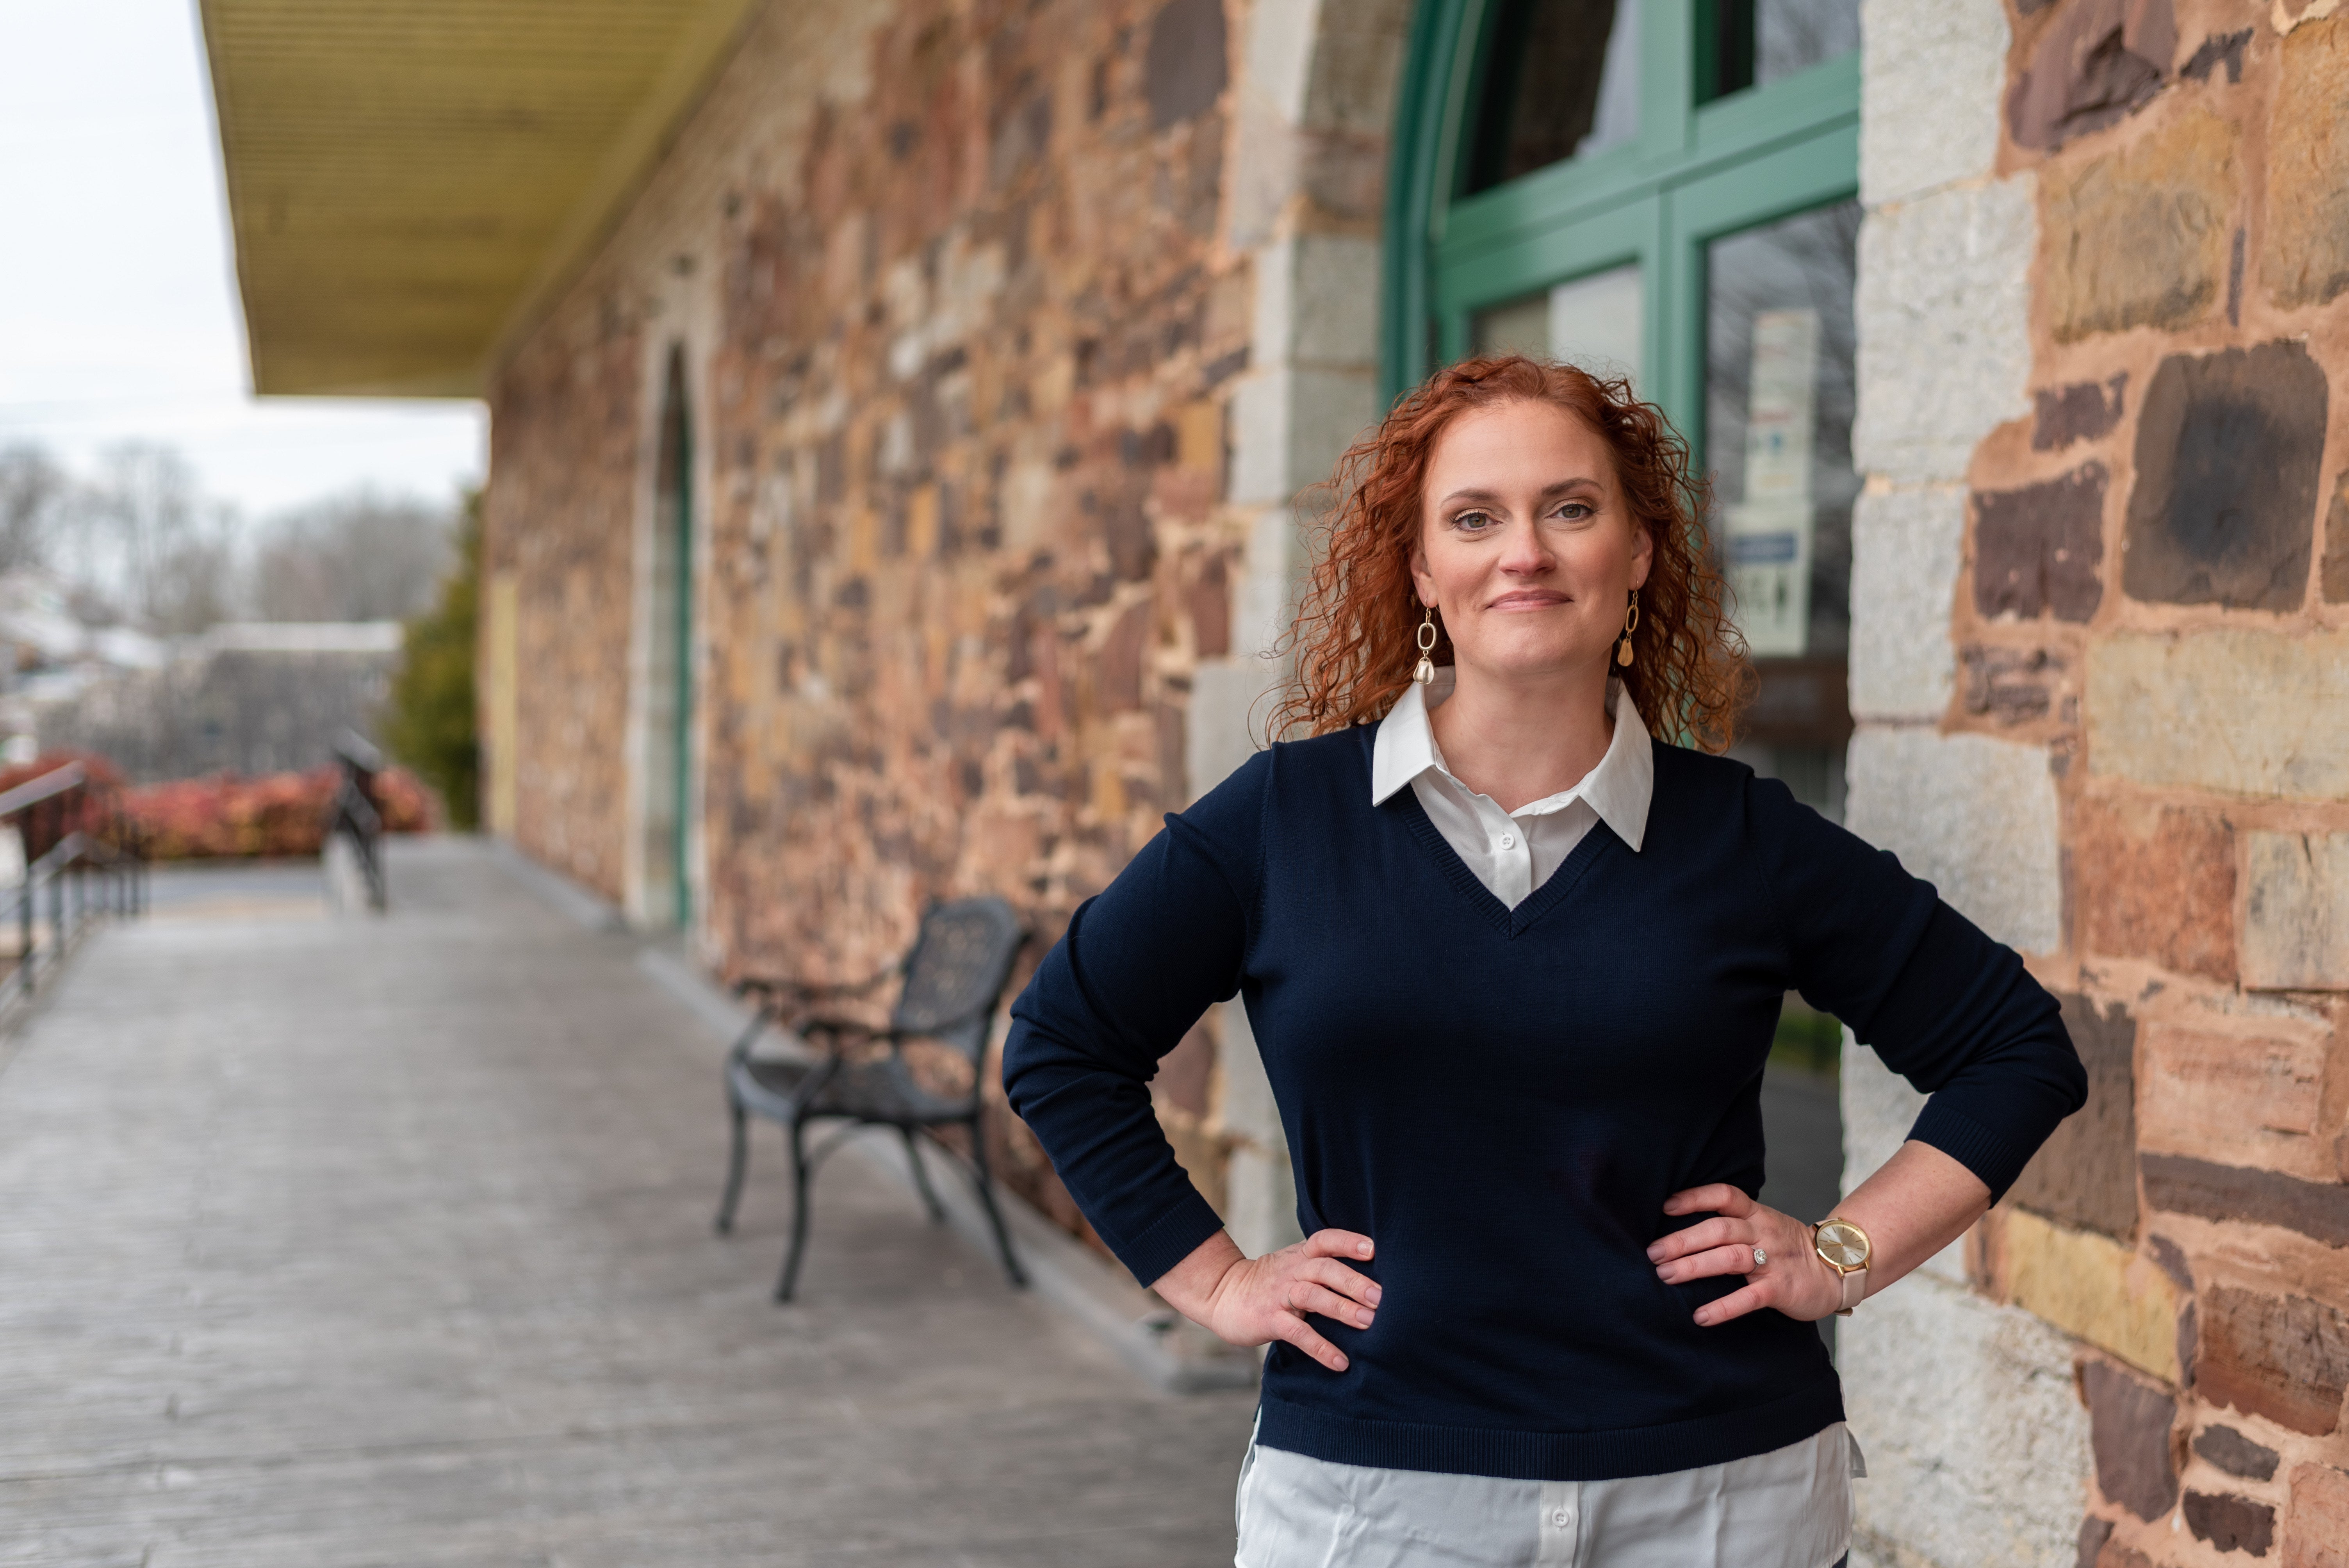 Holly McCormack is running to unseat Marjorie Taylor Green in Georgia’s 14th district